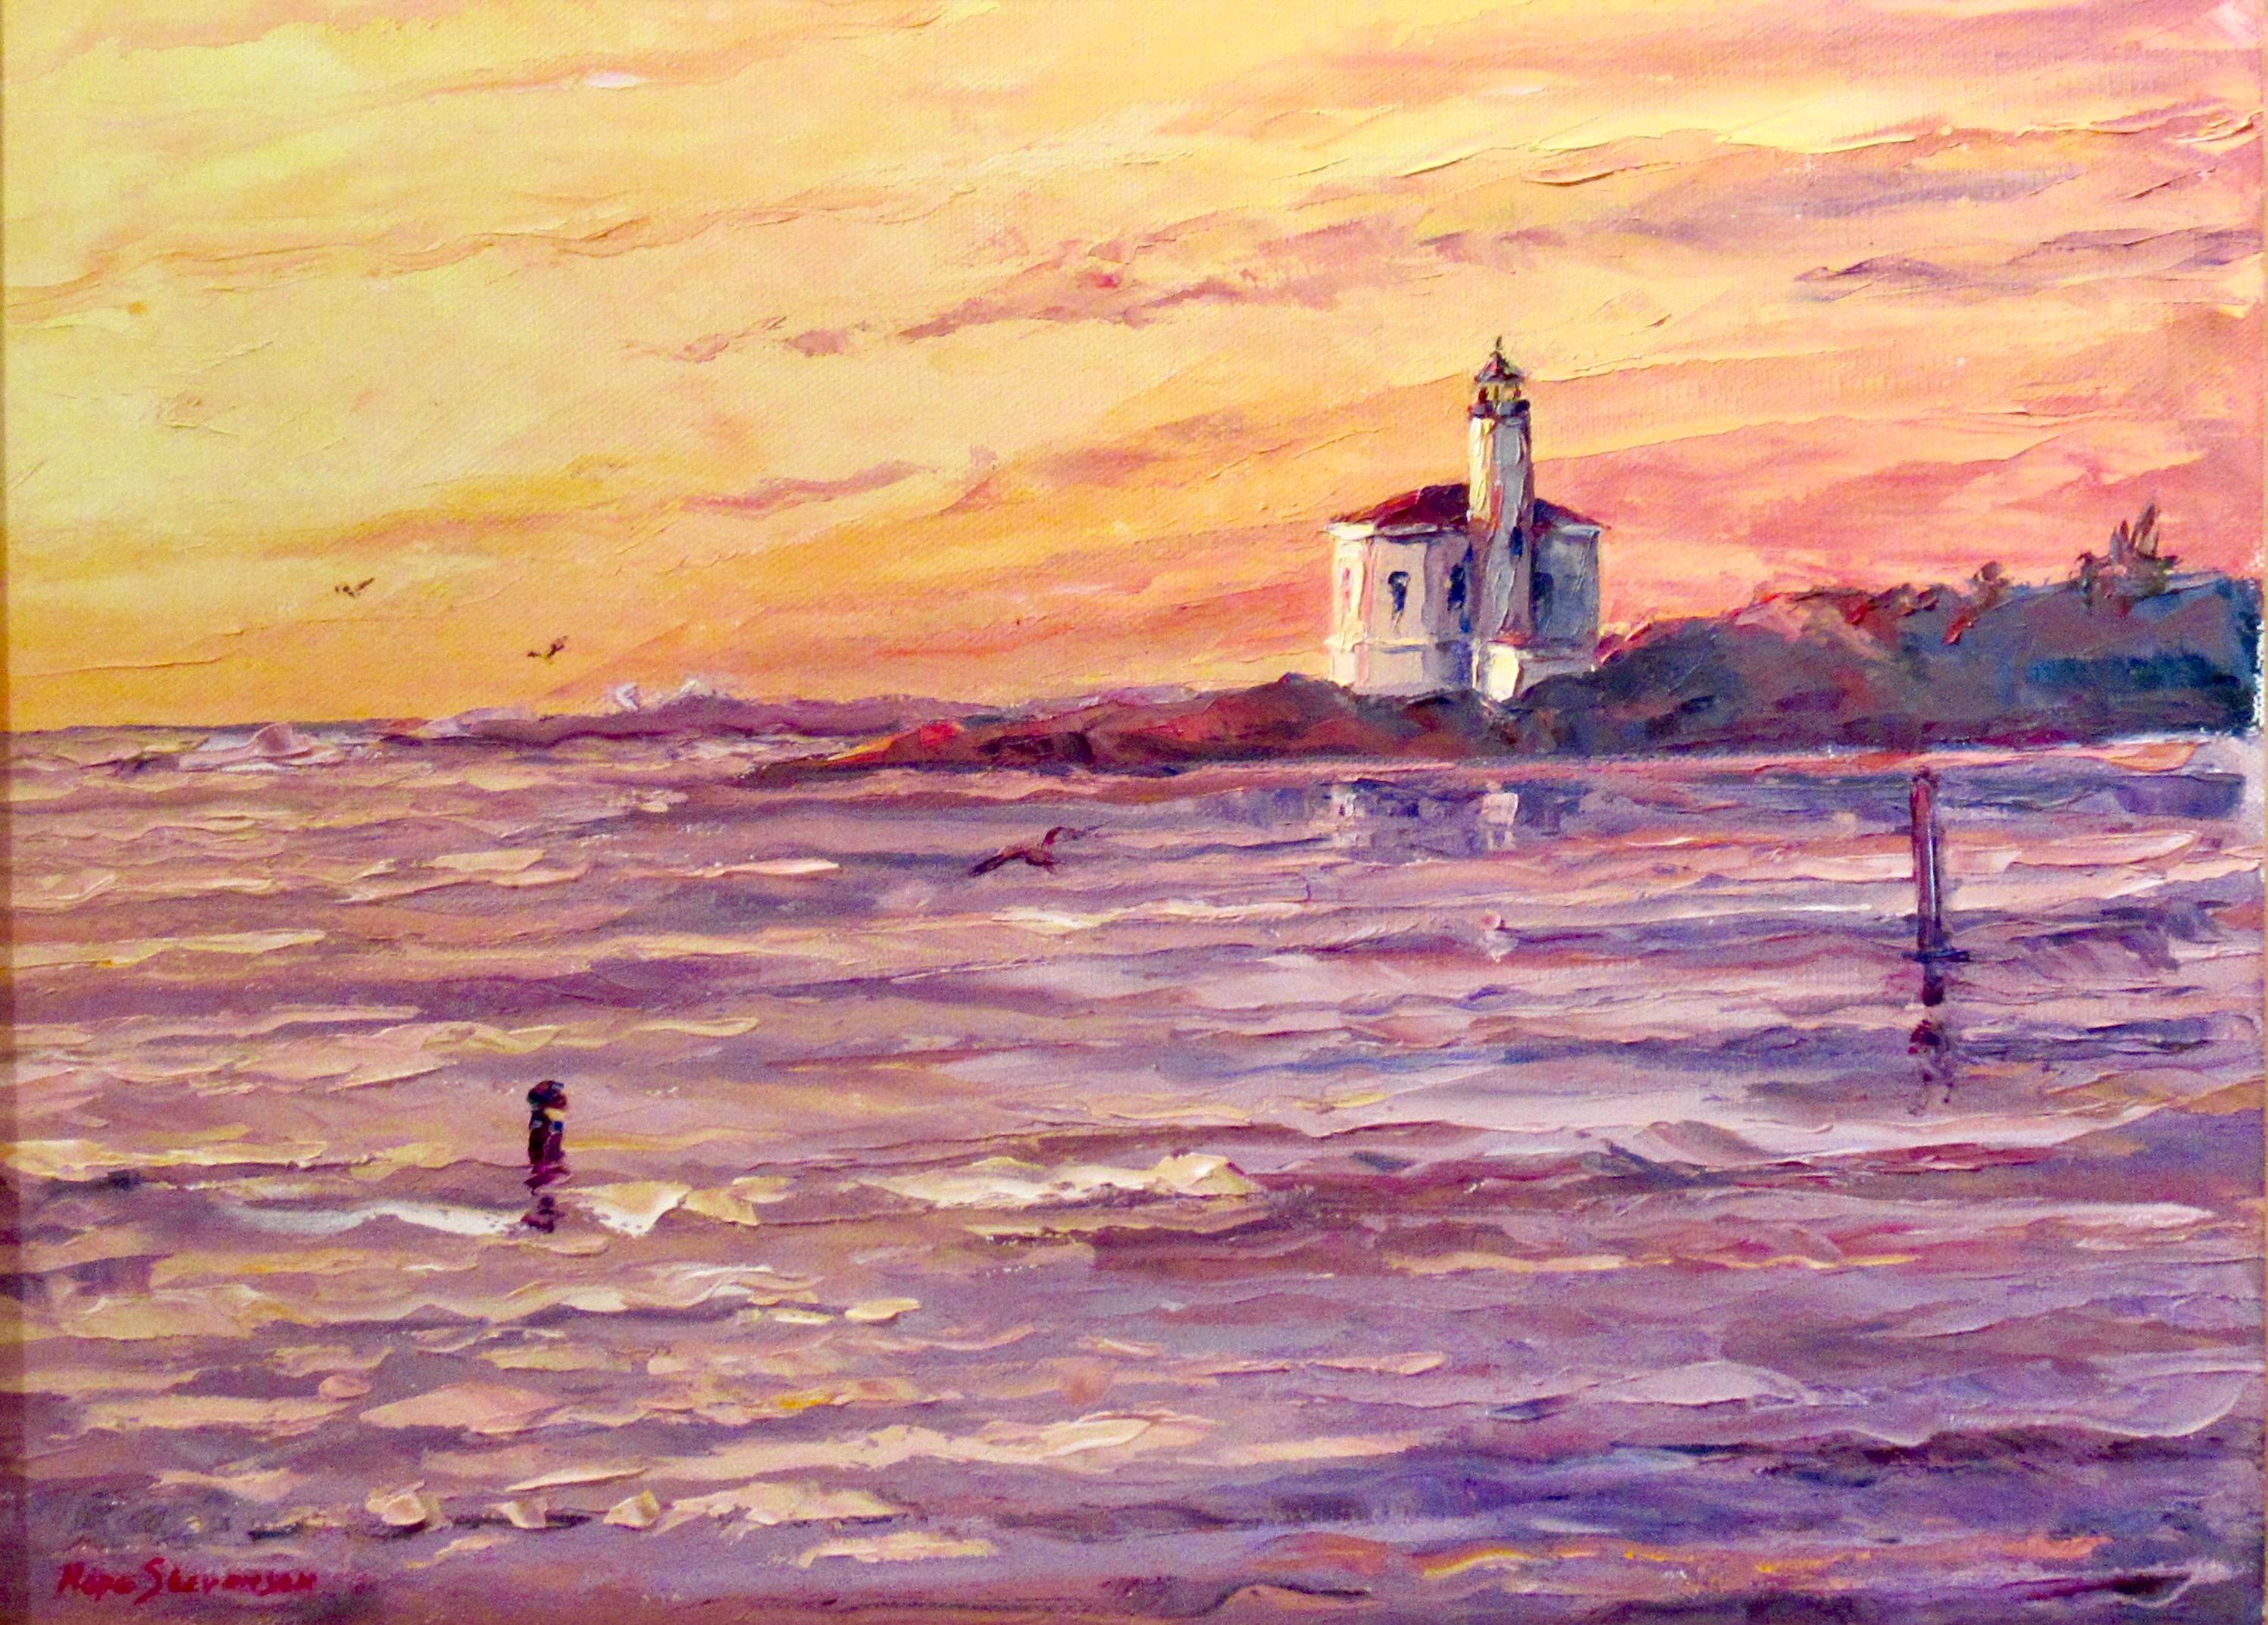 Point Cabrillo Light Station, Mendocino - Painting by Hope Stevenson